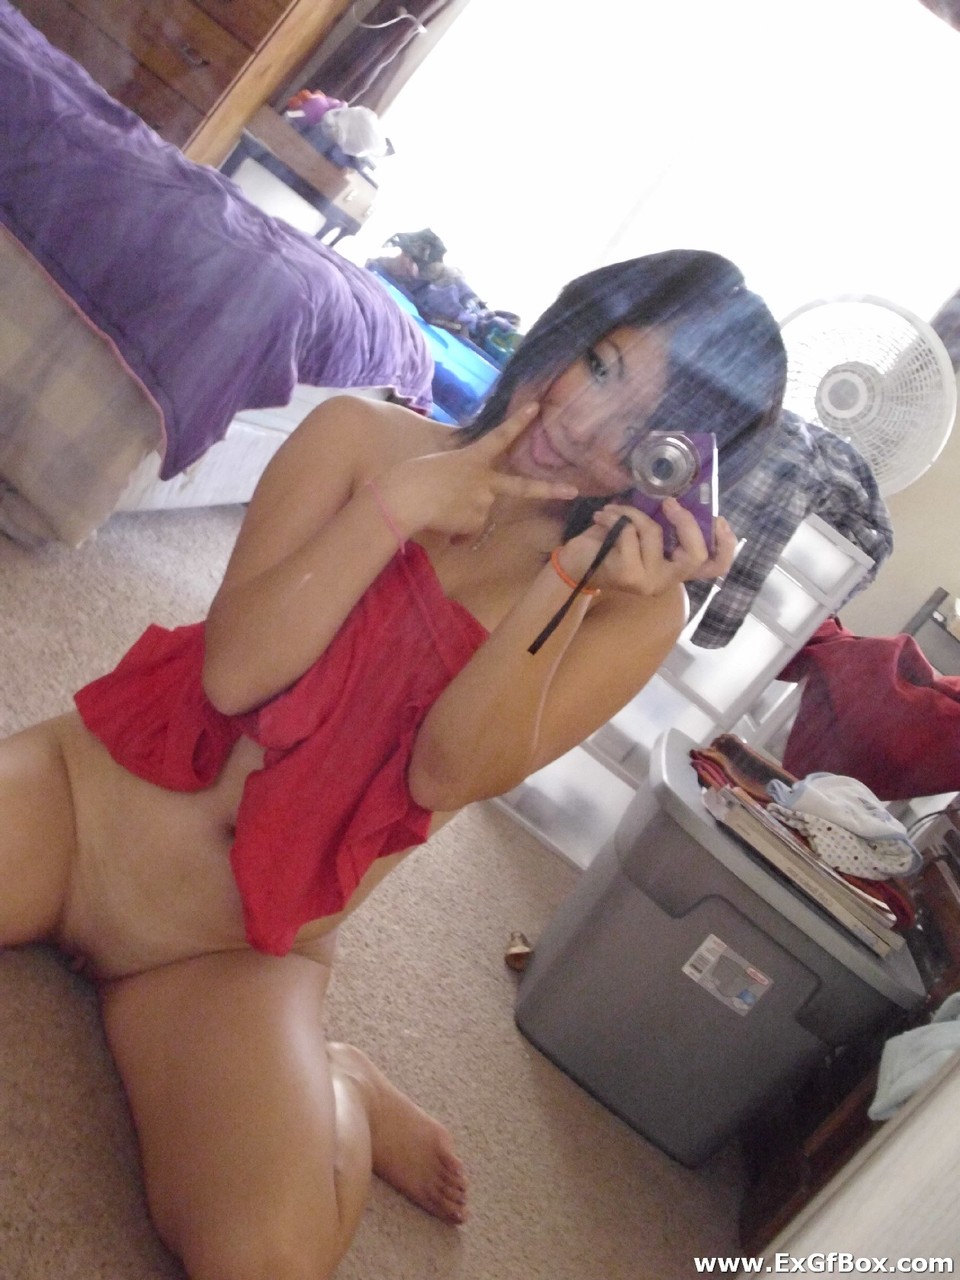 Bootylicious teenage girlfriend takes selfies of her hot body while stripping photo porno #426010469